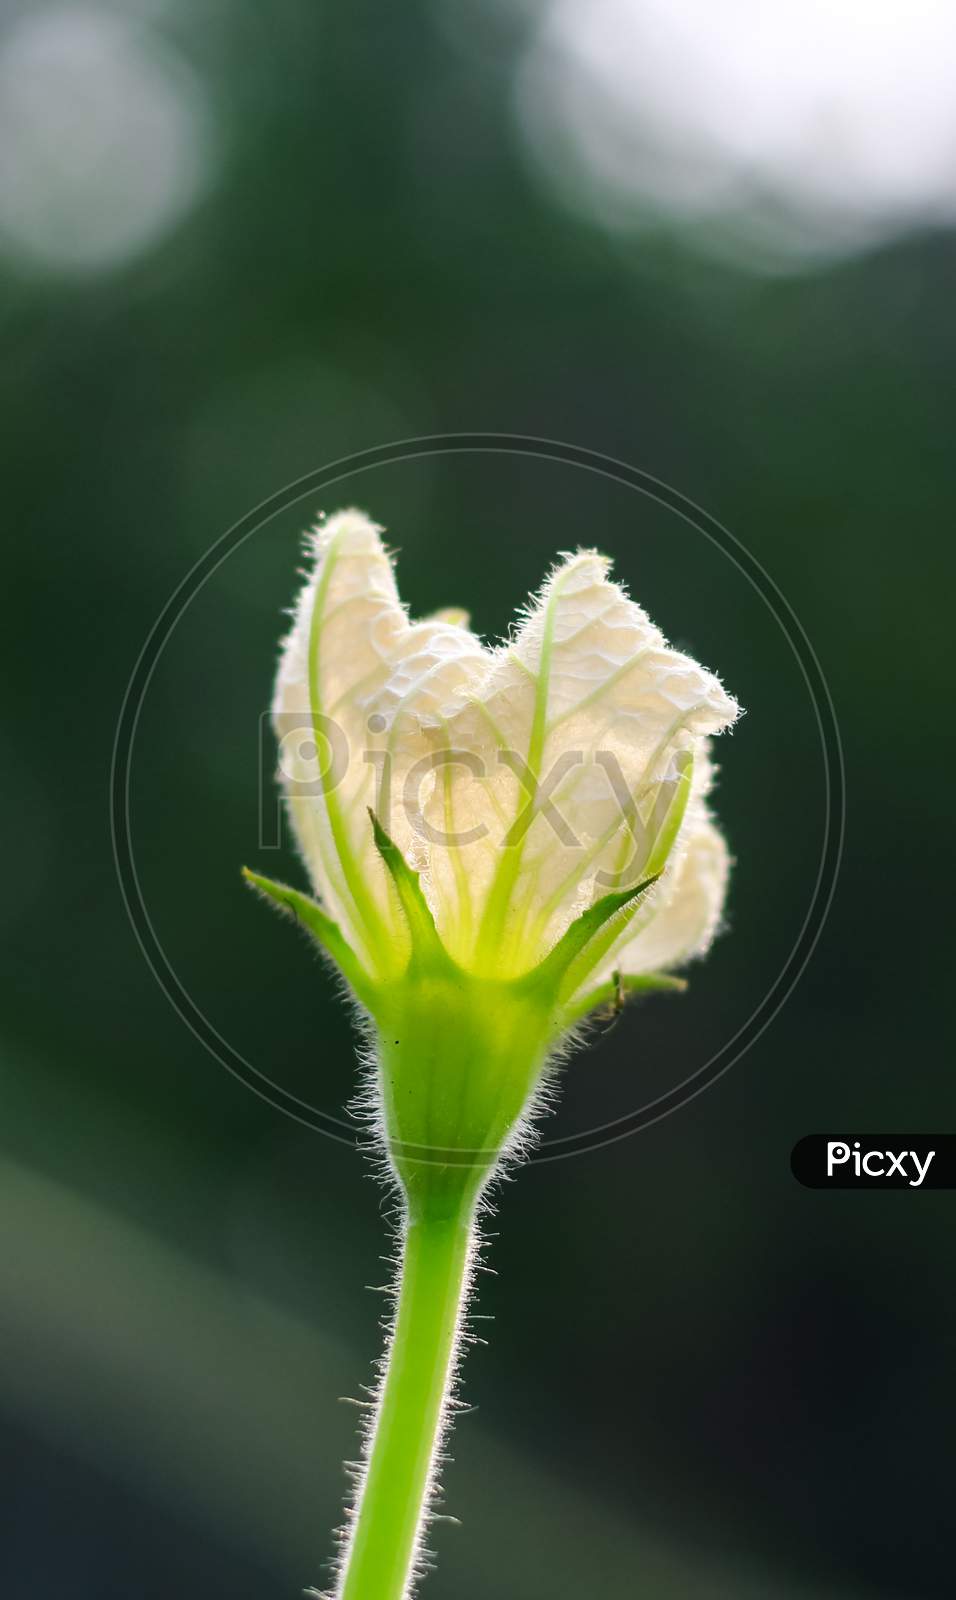 Calabash, also known as bottle gourd, white-flowered gourd, long melon, New Guinea bean and Tasmania bean, is a vine grown for its fruit. Female flower of calabash  with green bokeh background.